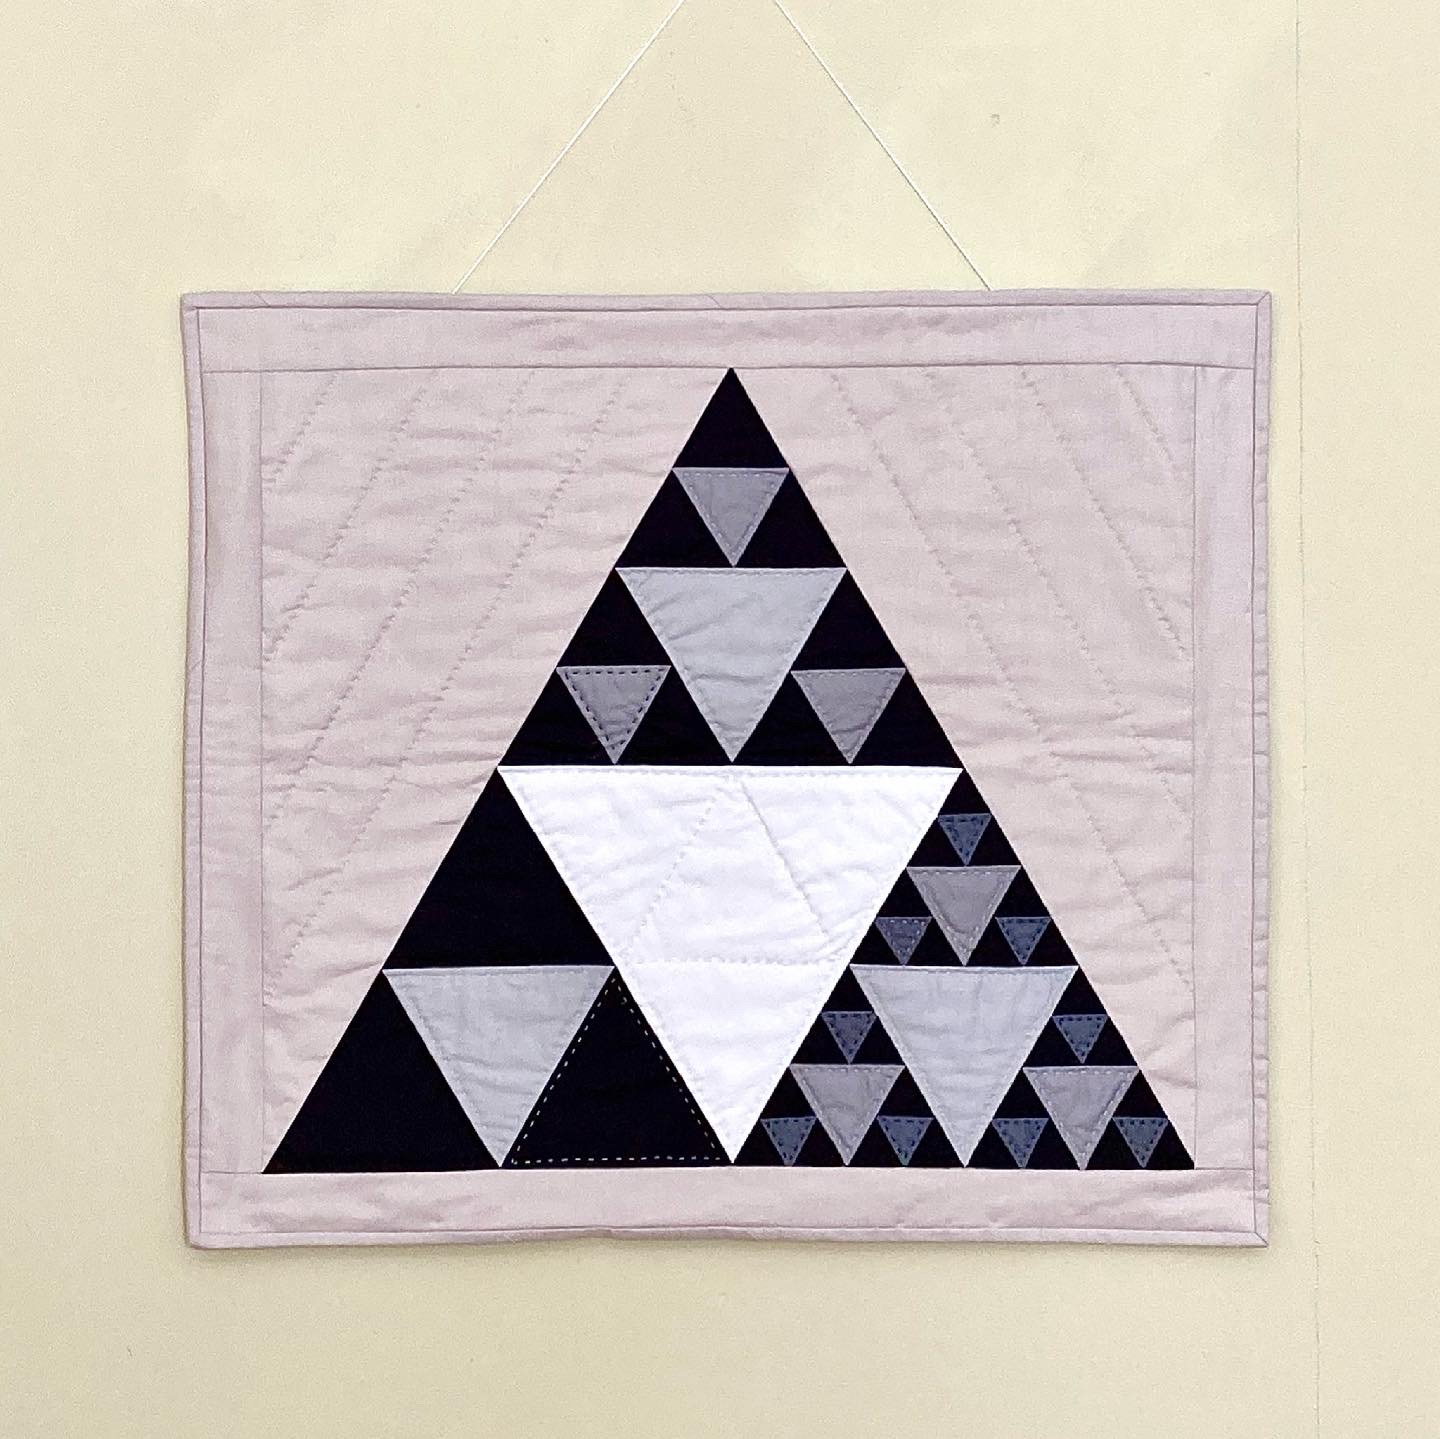 Sierpinski triangle fractal wall-hanging quilt in neutral colors